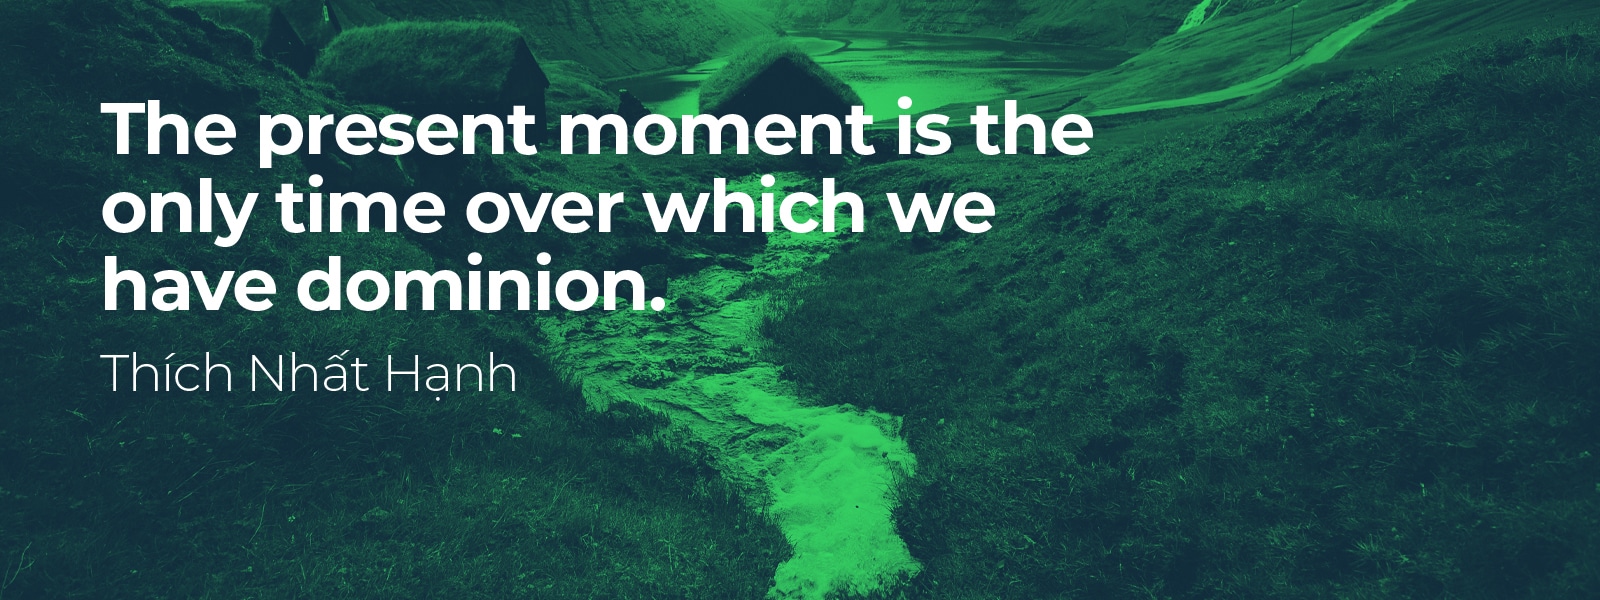 The present moment is the only time over which we have dominion - Thich Nhat Hanh